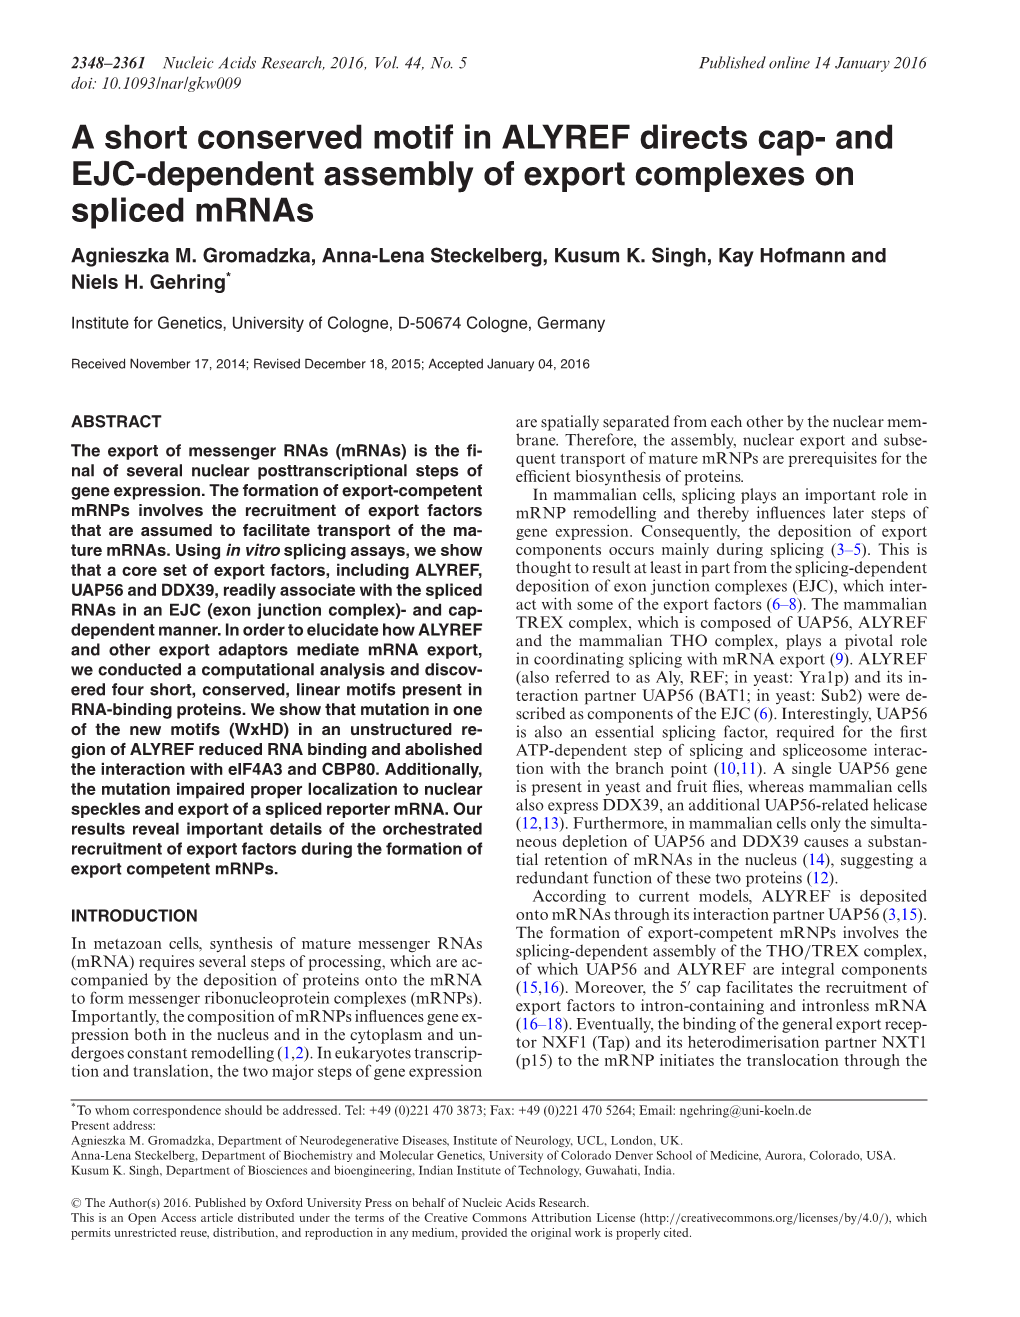 A Short Conserved Motif in ALYREF Directs Cap- and EJC-Dependent Assembly of Export Complexes on Spliced Mrnas Agnieszka M